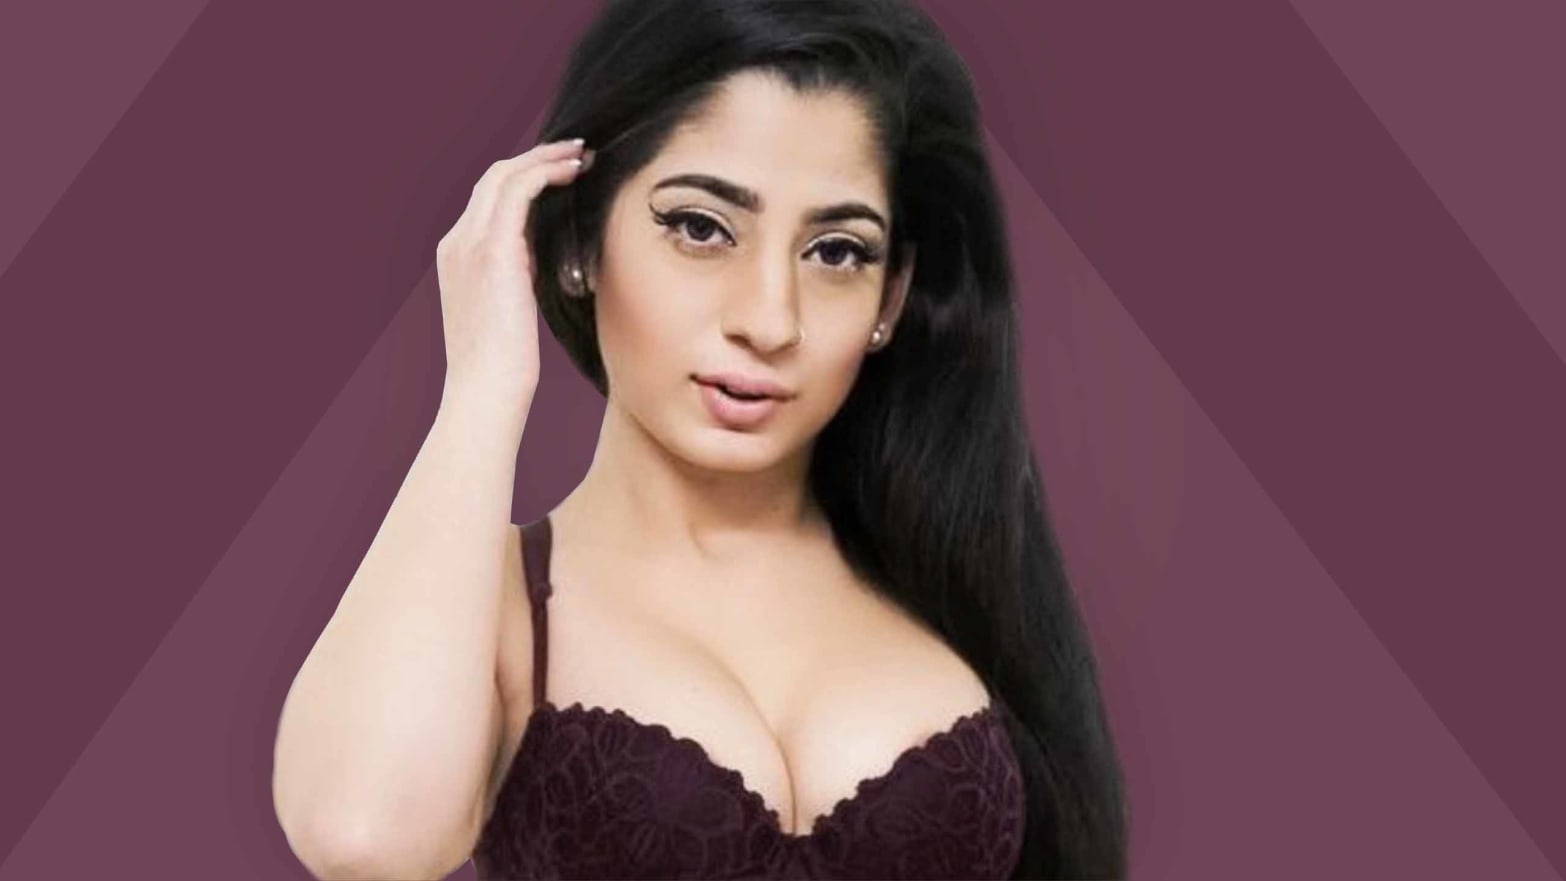 chris twohig recommends Nadia Ali Adult Star